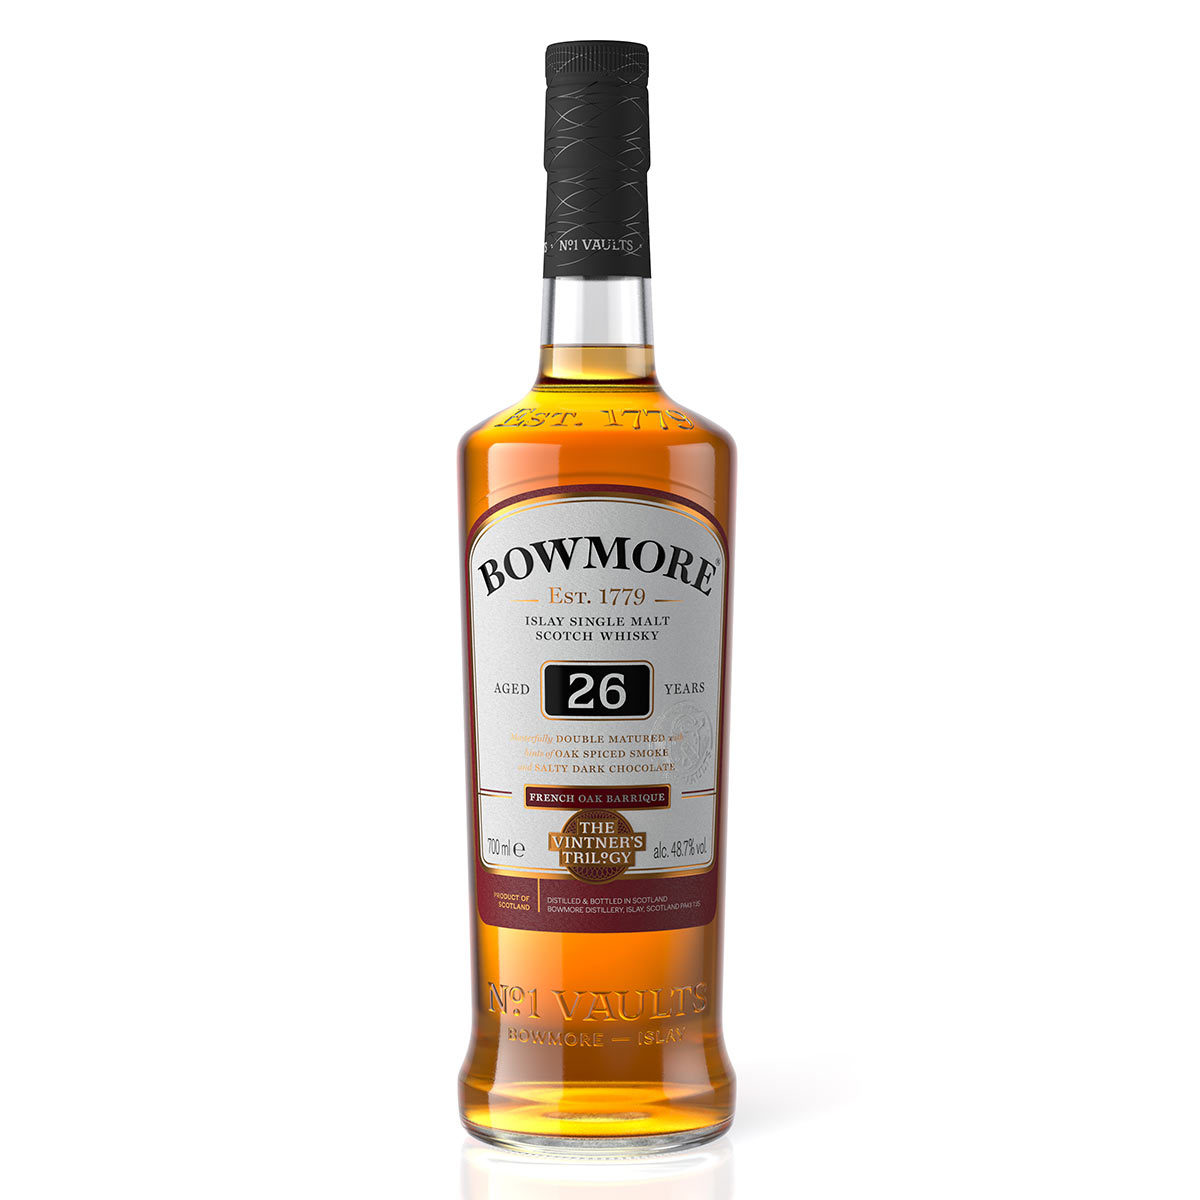 Bowmore 26 Year Old Matured Single Malt Scotch Whisky, Vintner's Trilogy - Part Two,  70cl